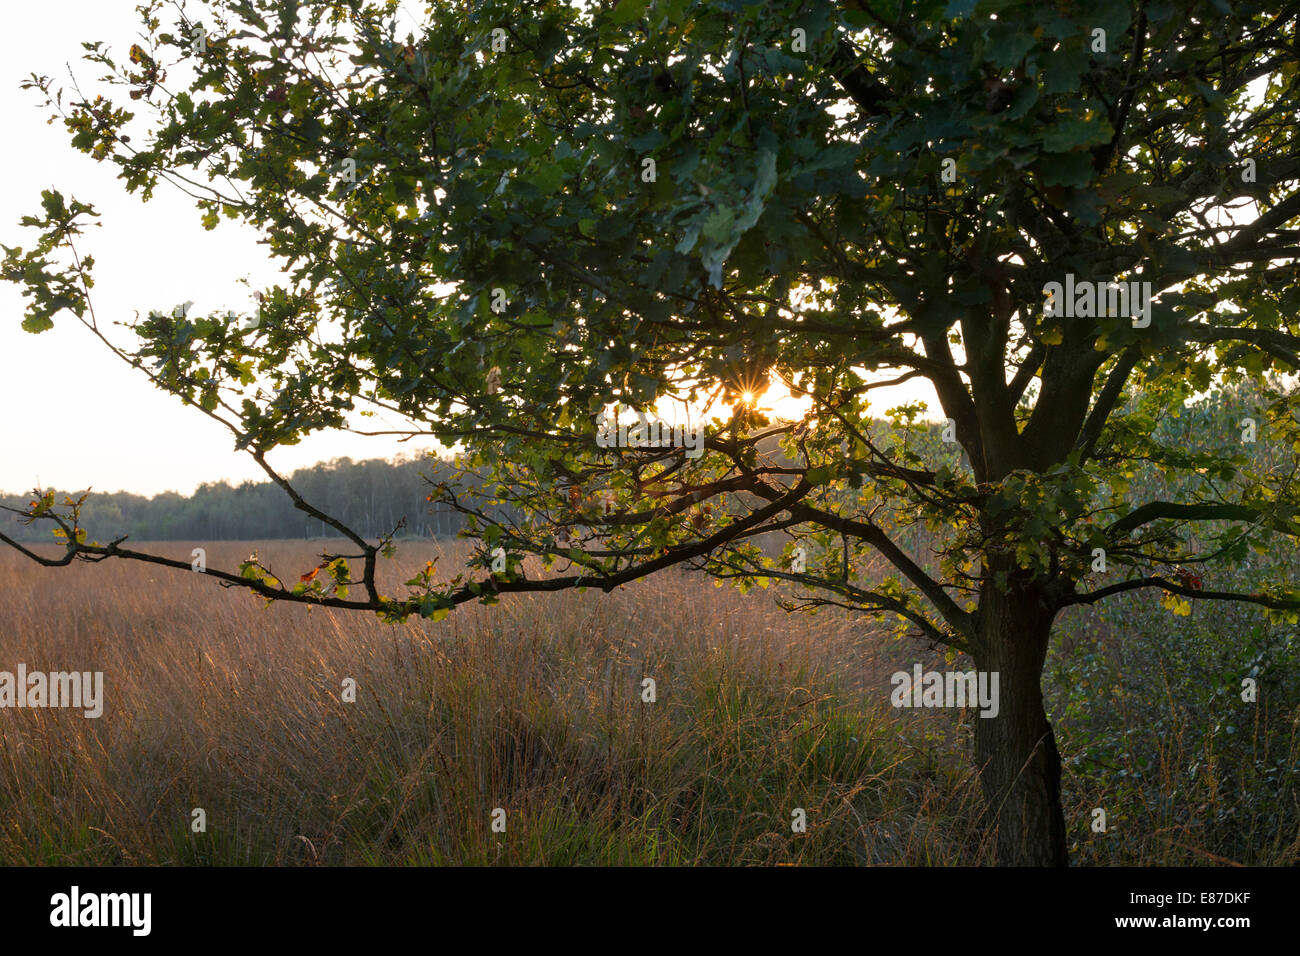 Landscape at National Park 'de Groote Peel' with autumn sunset back light on an oak tree Stock Photo